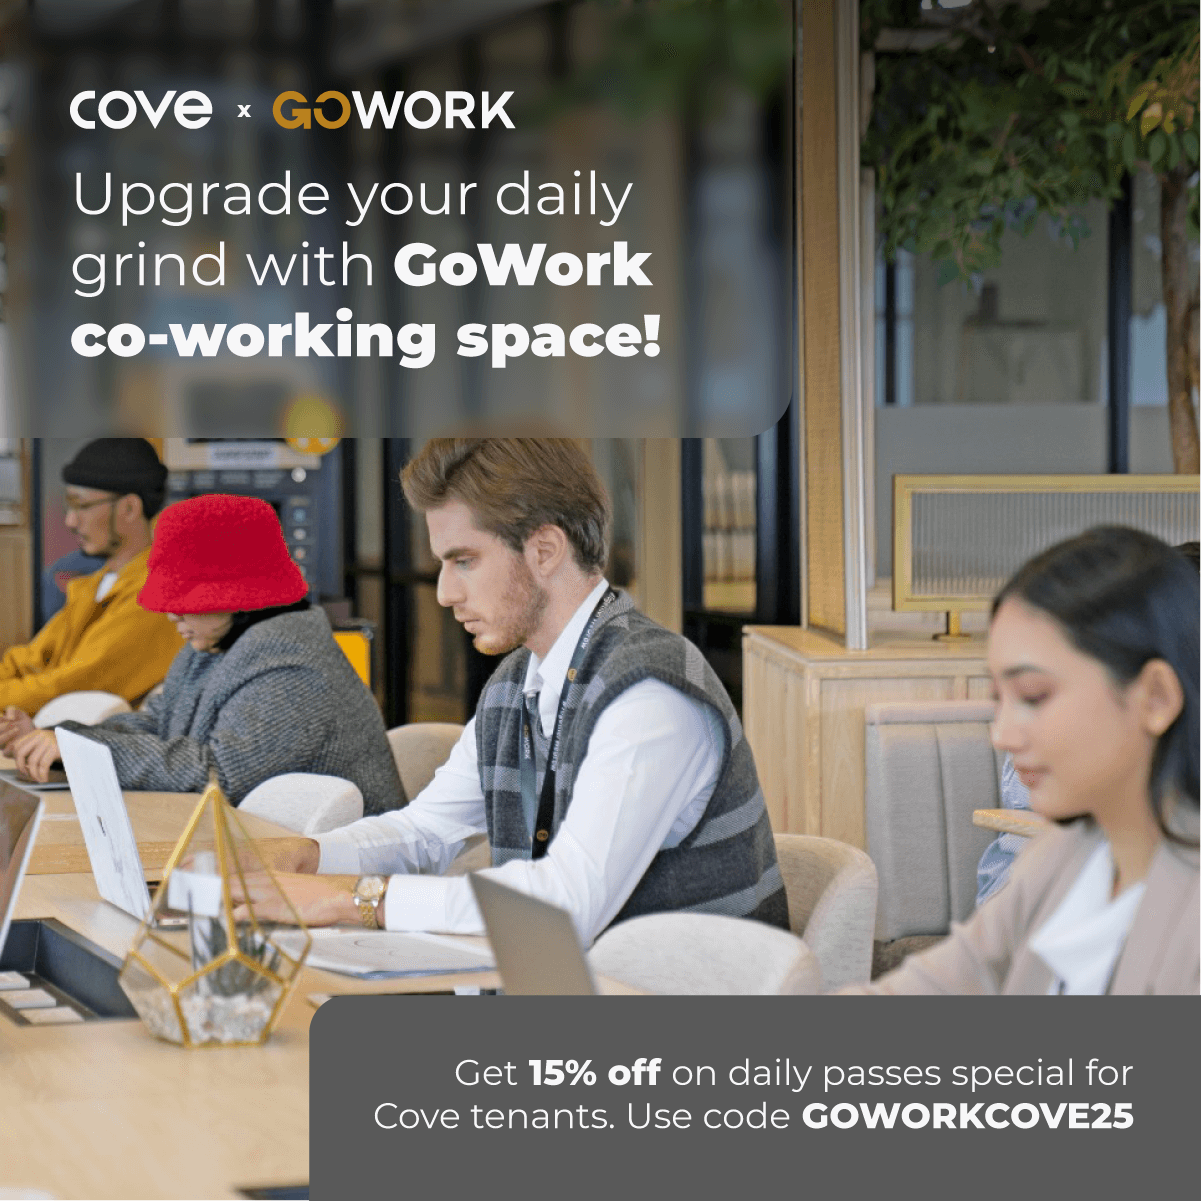 Your daily grind, upgraded! Save up to Rp 25K for daily co-working at GoWork